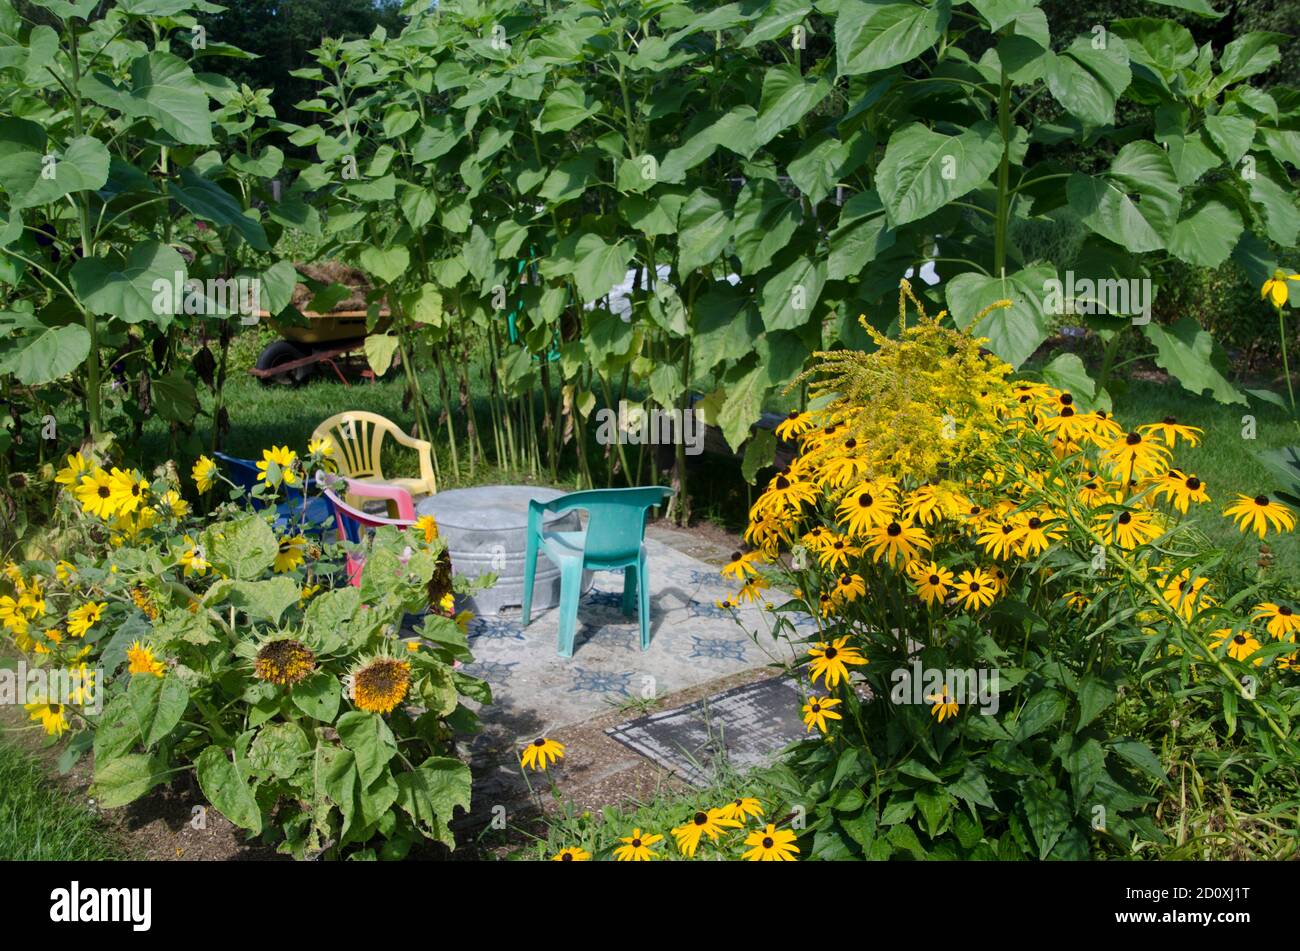 Sunflower room in childrens garden with colorful plastic chairs Stock Photo